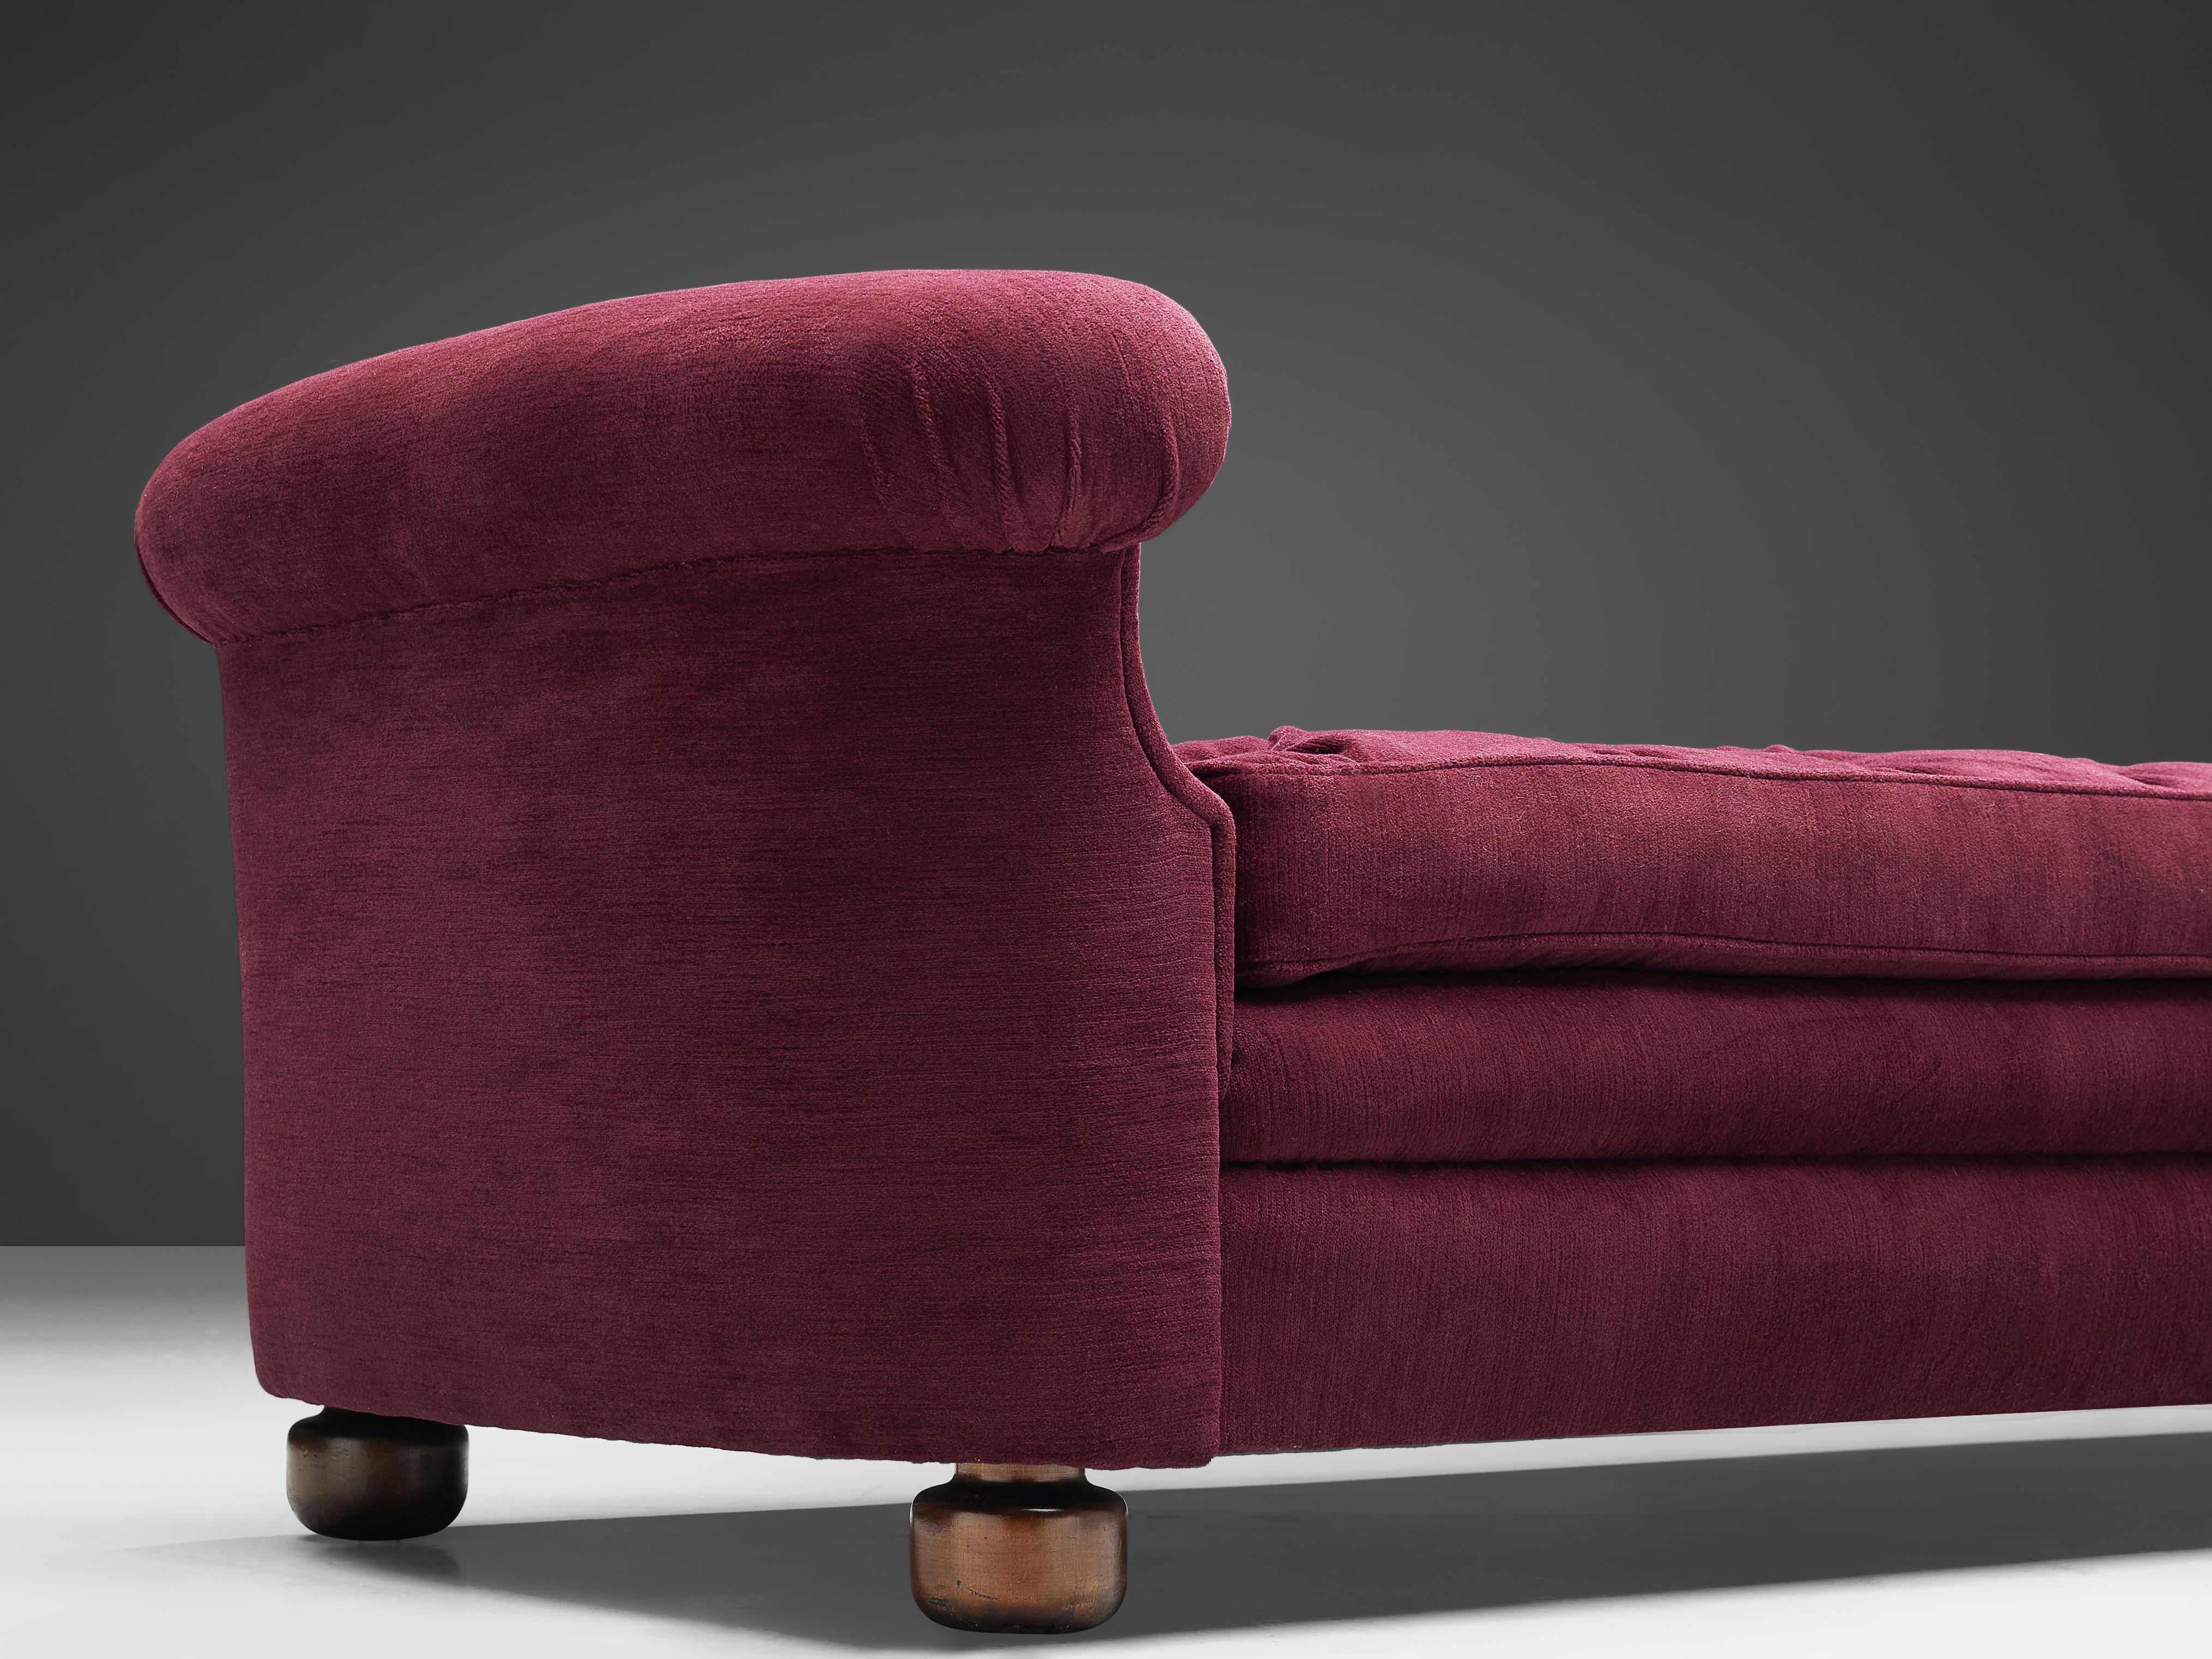 Mid-20th Century Josef Frank Chaise Longue '775' Reupholstered in Burgundy Fabric